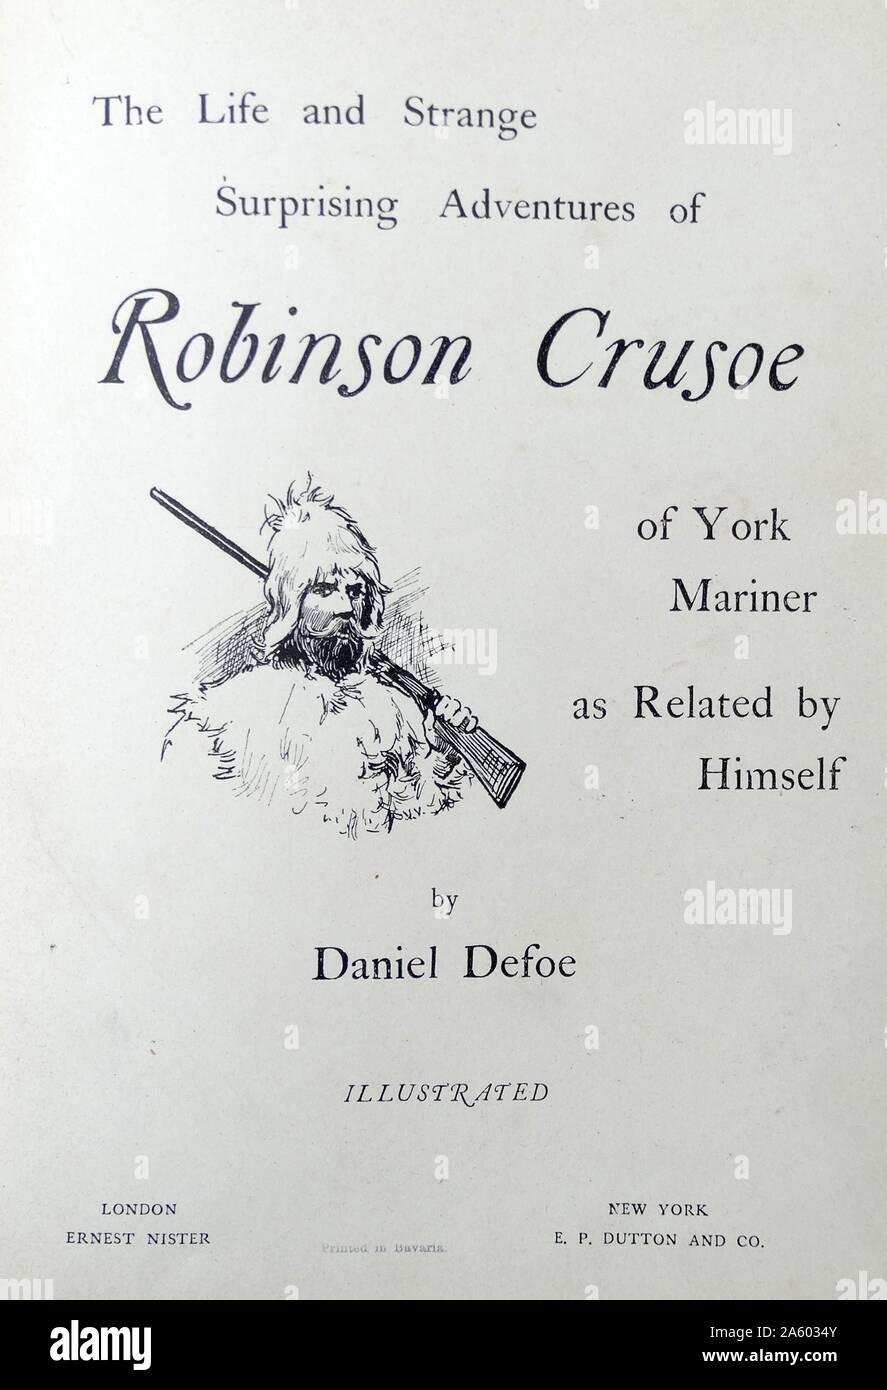 Title page Illustration, from a nineteenth century edition of 'Robinson Crusoe' a novel by Daniel Defoe. The book was first published on 25 April 1719. It relates the story of Robinson Crusoe, stranded on a desert Island for 28 years and his subsequent fight for survival. Stock Photo